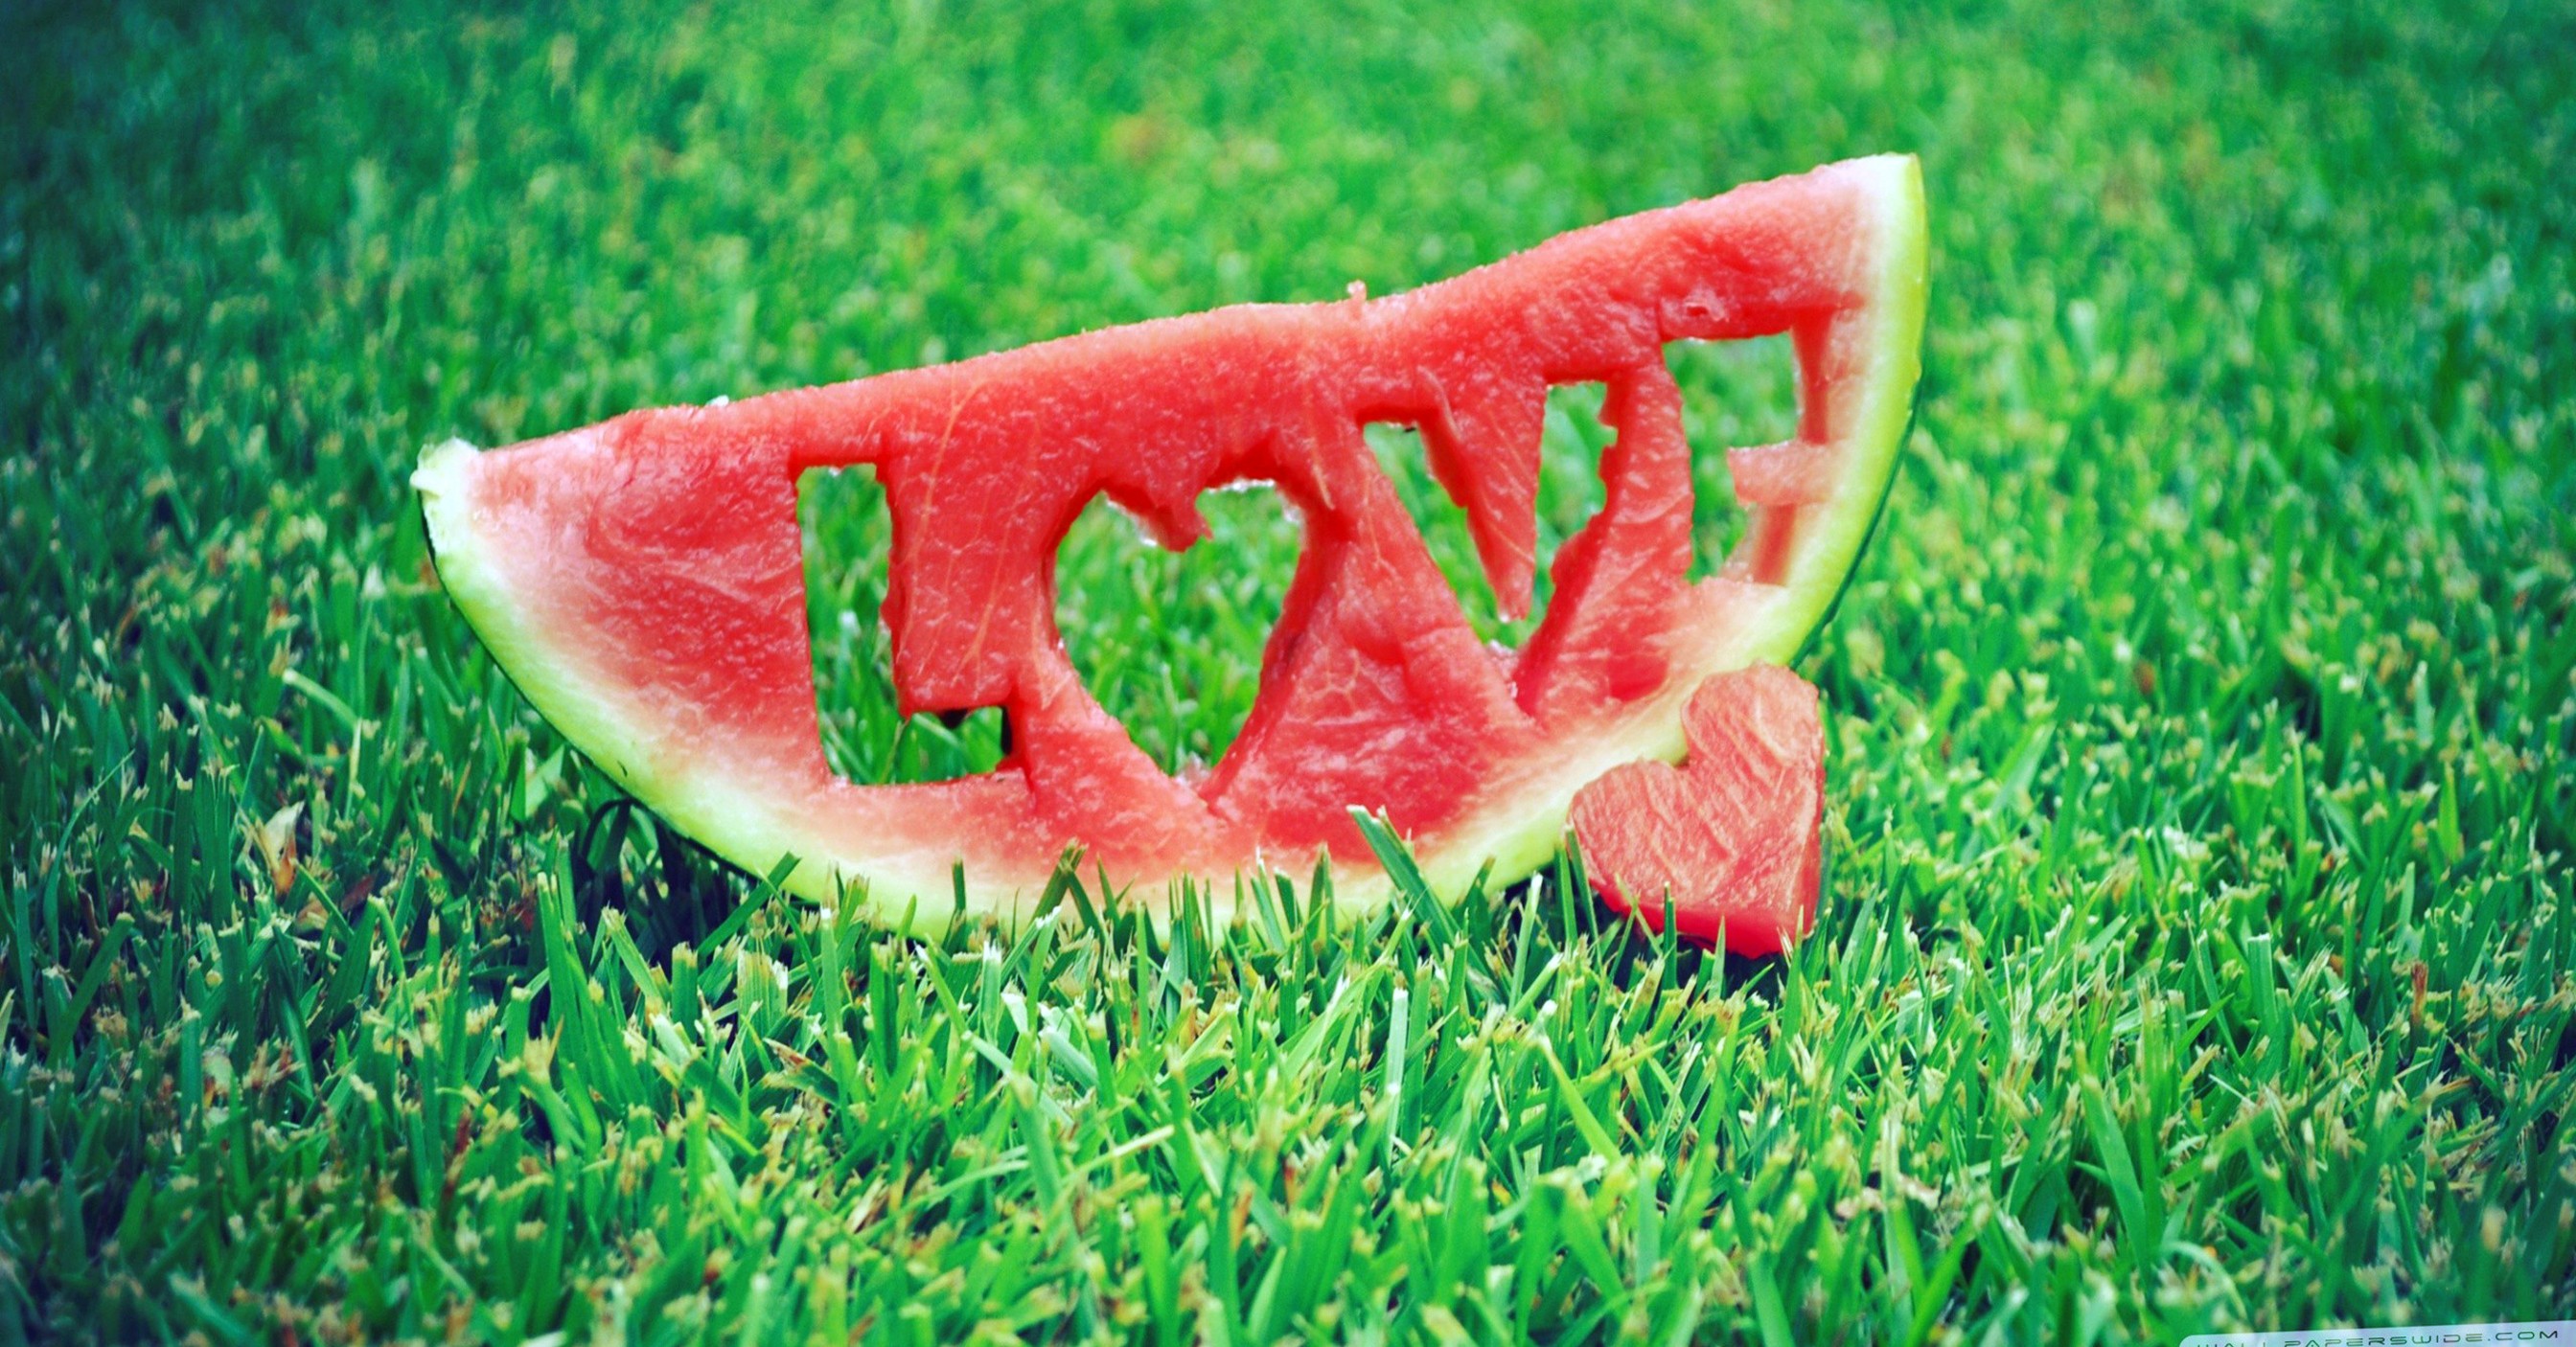 Love Watermelons On The Grass Wallpaper